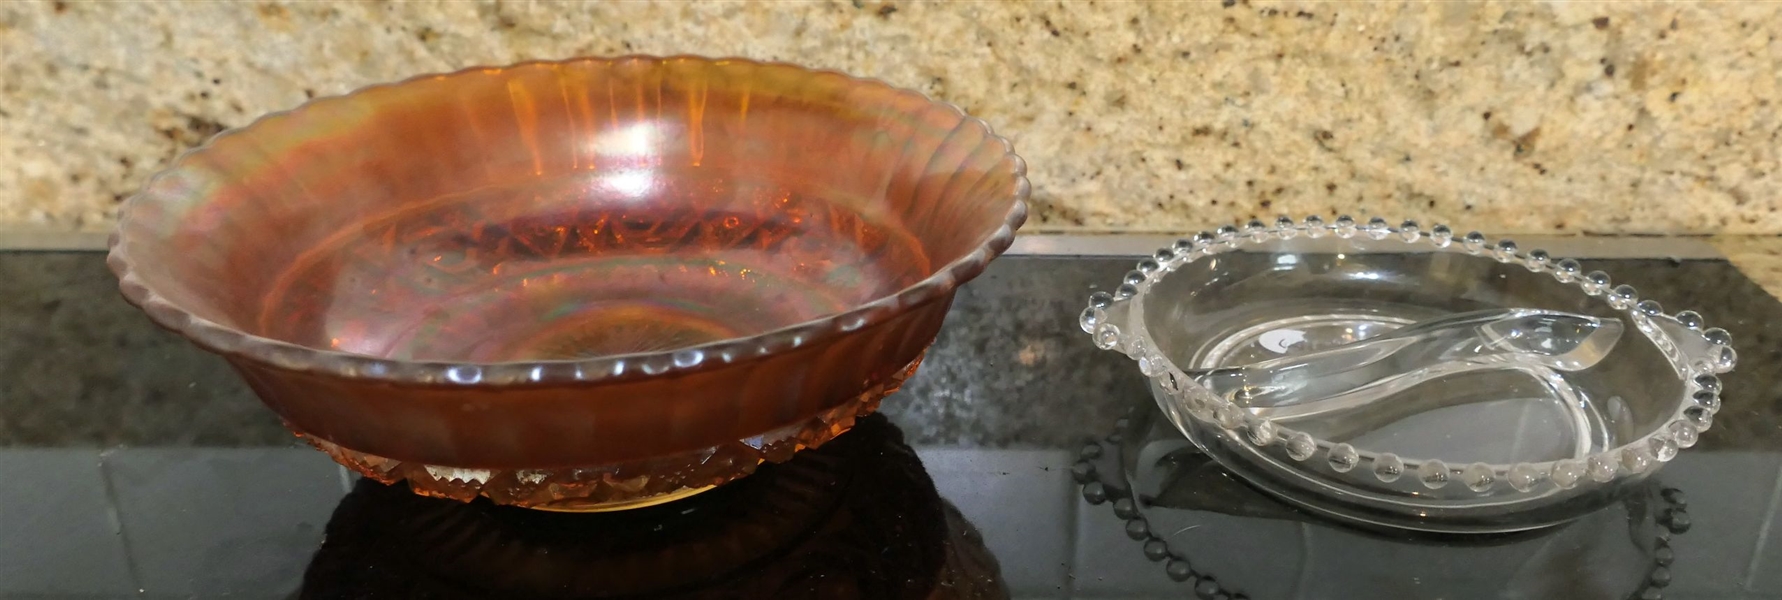 Iridized Bowl and Candlewick Divided Dish - Bowl Measures 9" Across